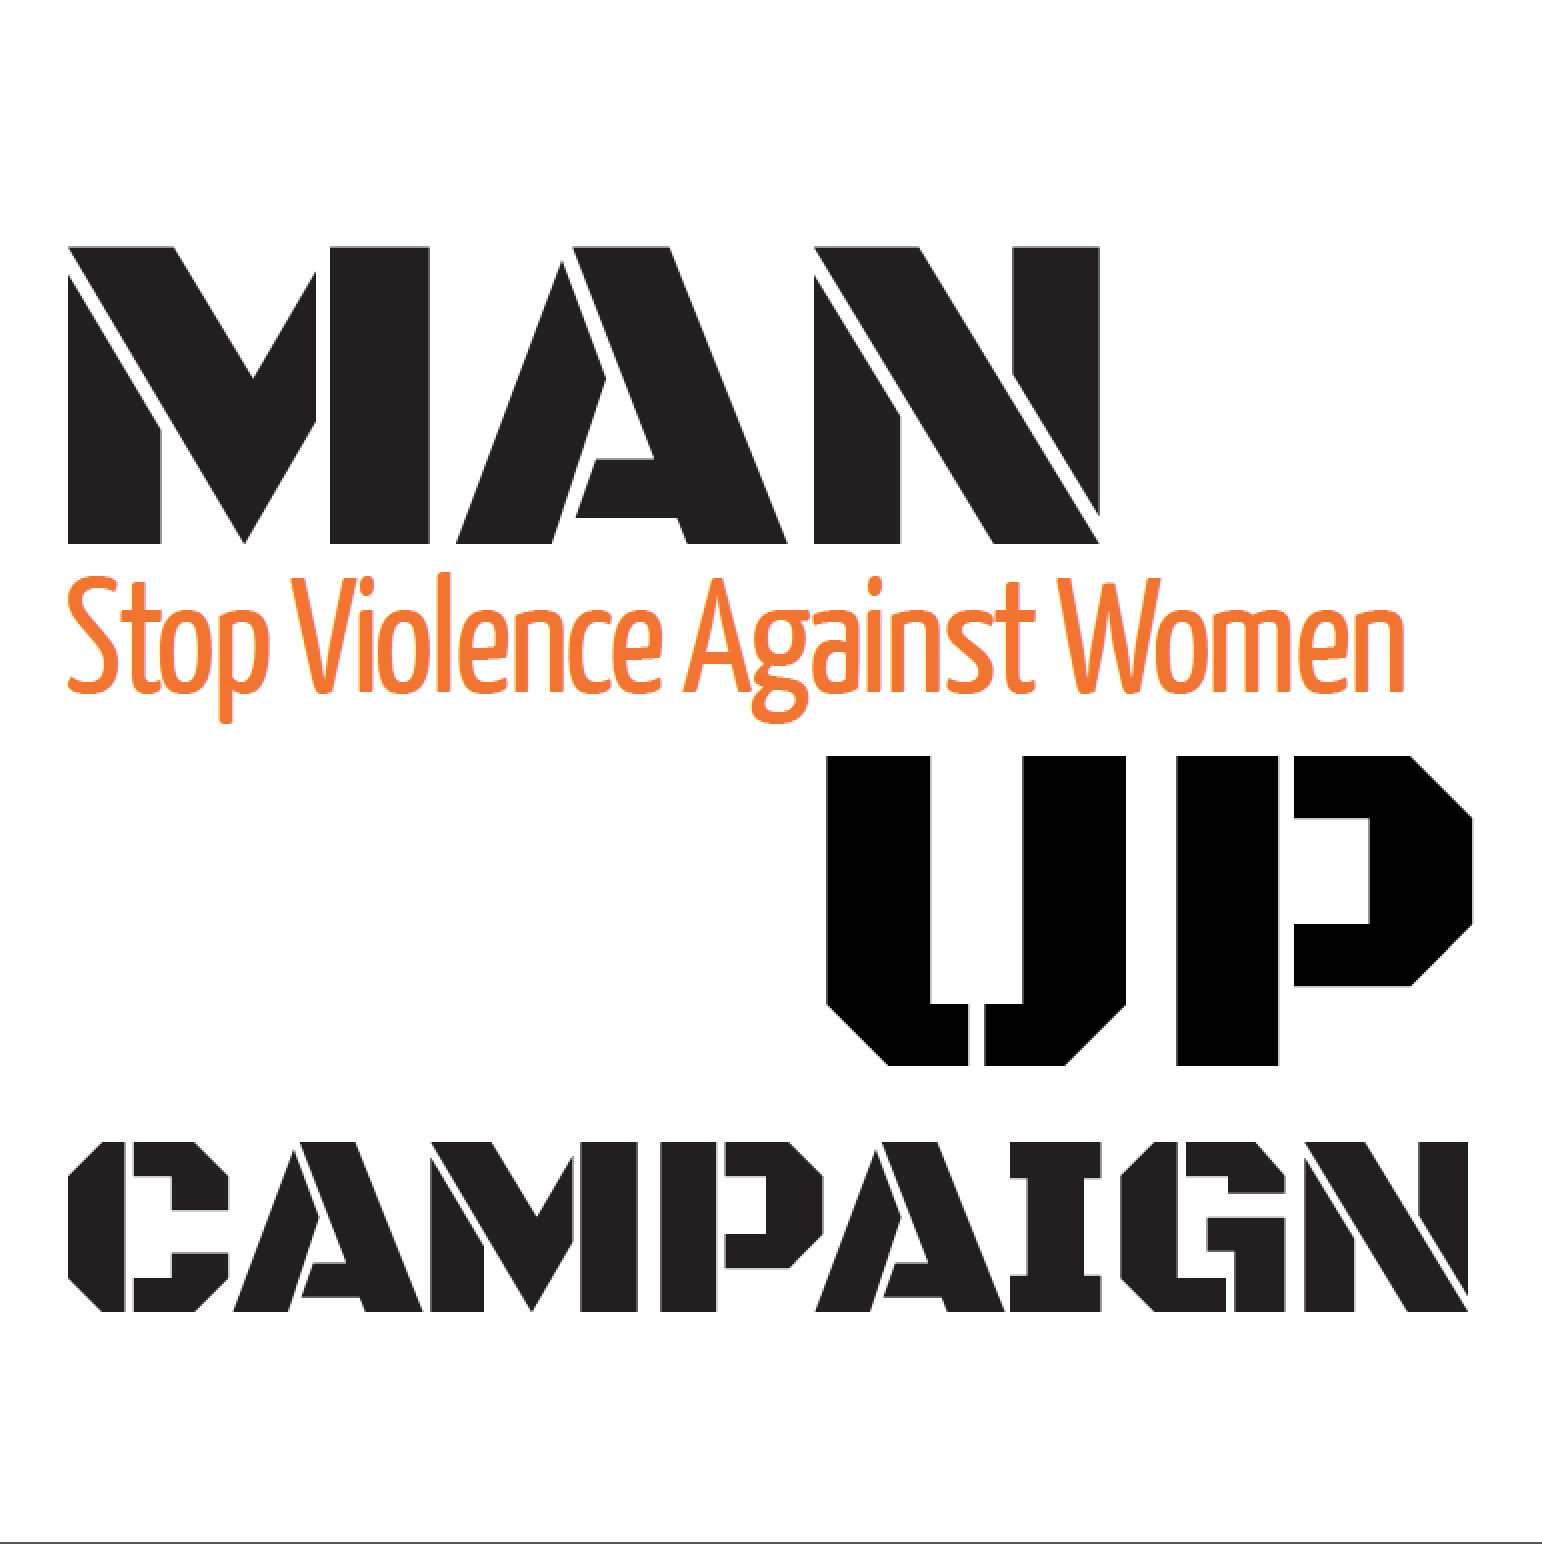 nnounced at the Clinton Global Initiative in September 2009 in collaboration with Vital Voices Global Partnership, Man Up is a global campaign to activate youth to stop violence against women and girl